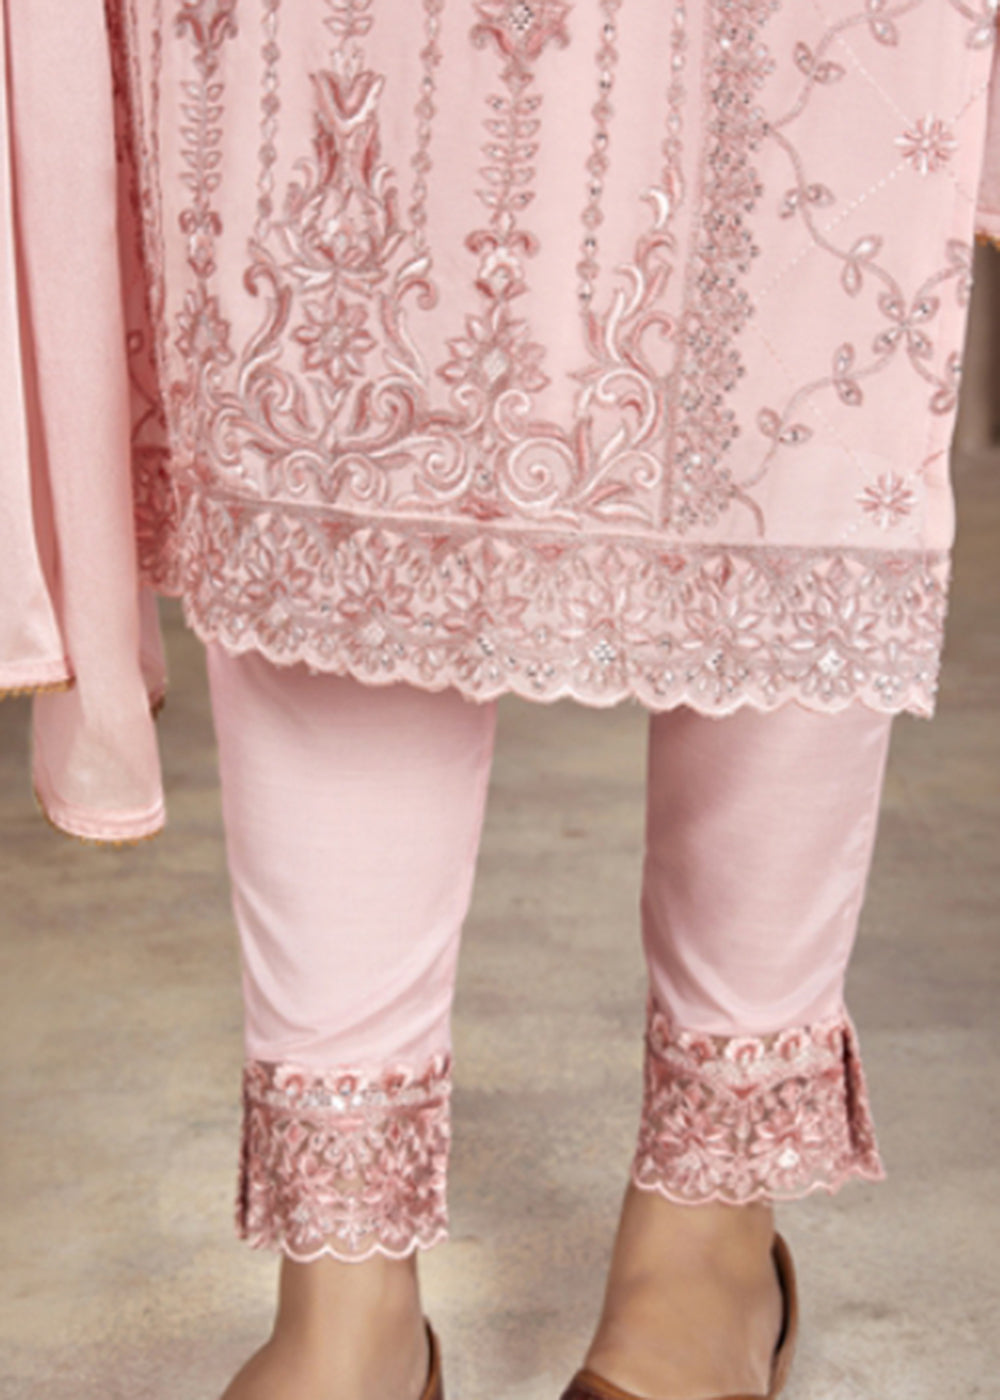 Buy Now Festive Look Elegant Pink Embroidered Pant Style Salwar Suit Online in USA, UK, Canada & Worldwide at Empress Clothing.